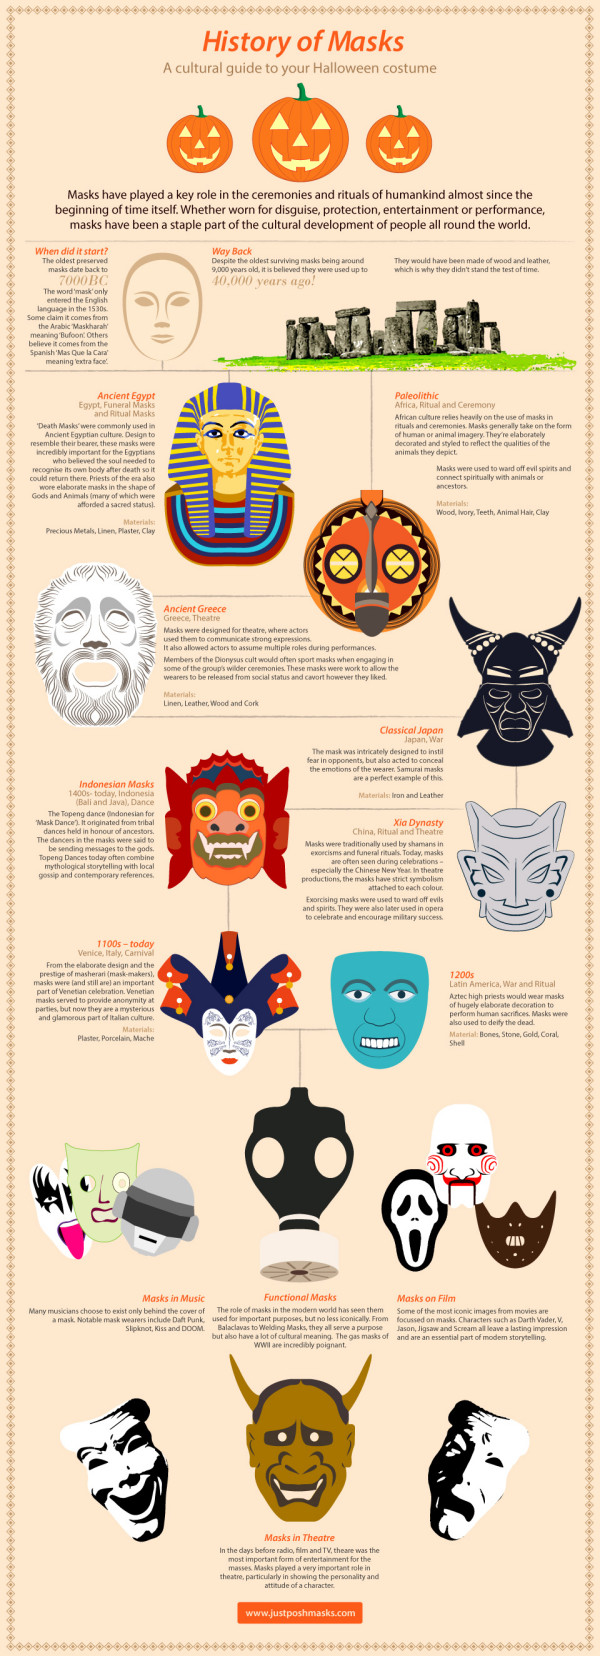 a-history-of-masks-for-halloween_5267dfa85dc27